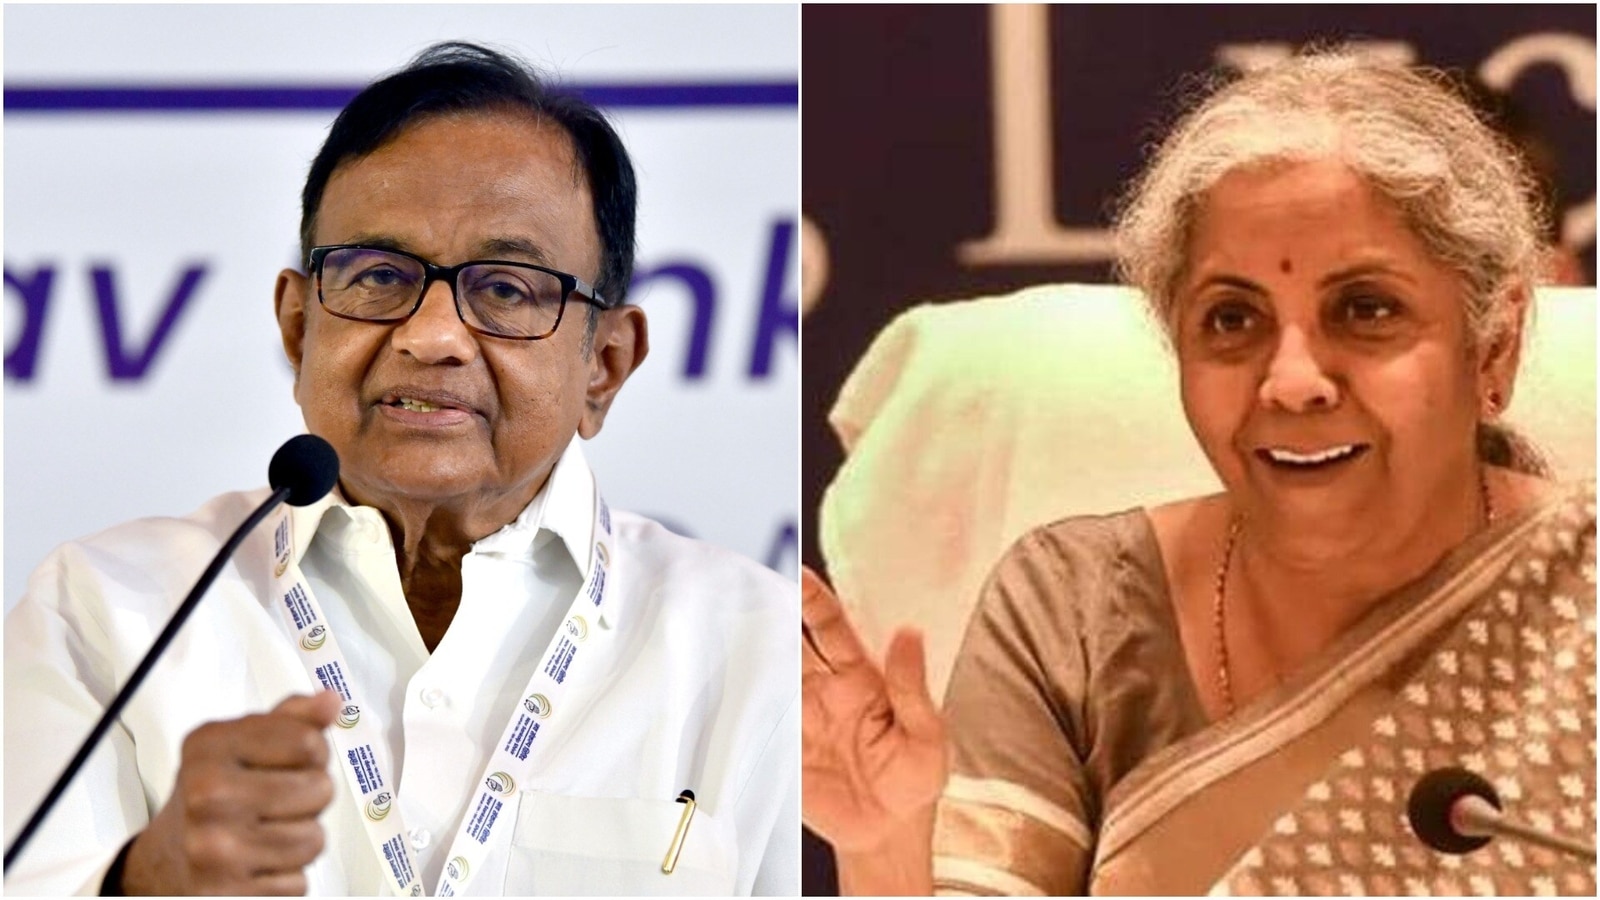 Chidambaram hits out at minister over VAT cut request. Then admits mistake  | Latest News India - Hindustan Times